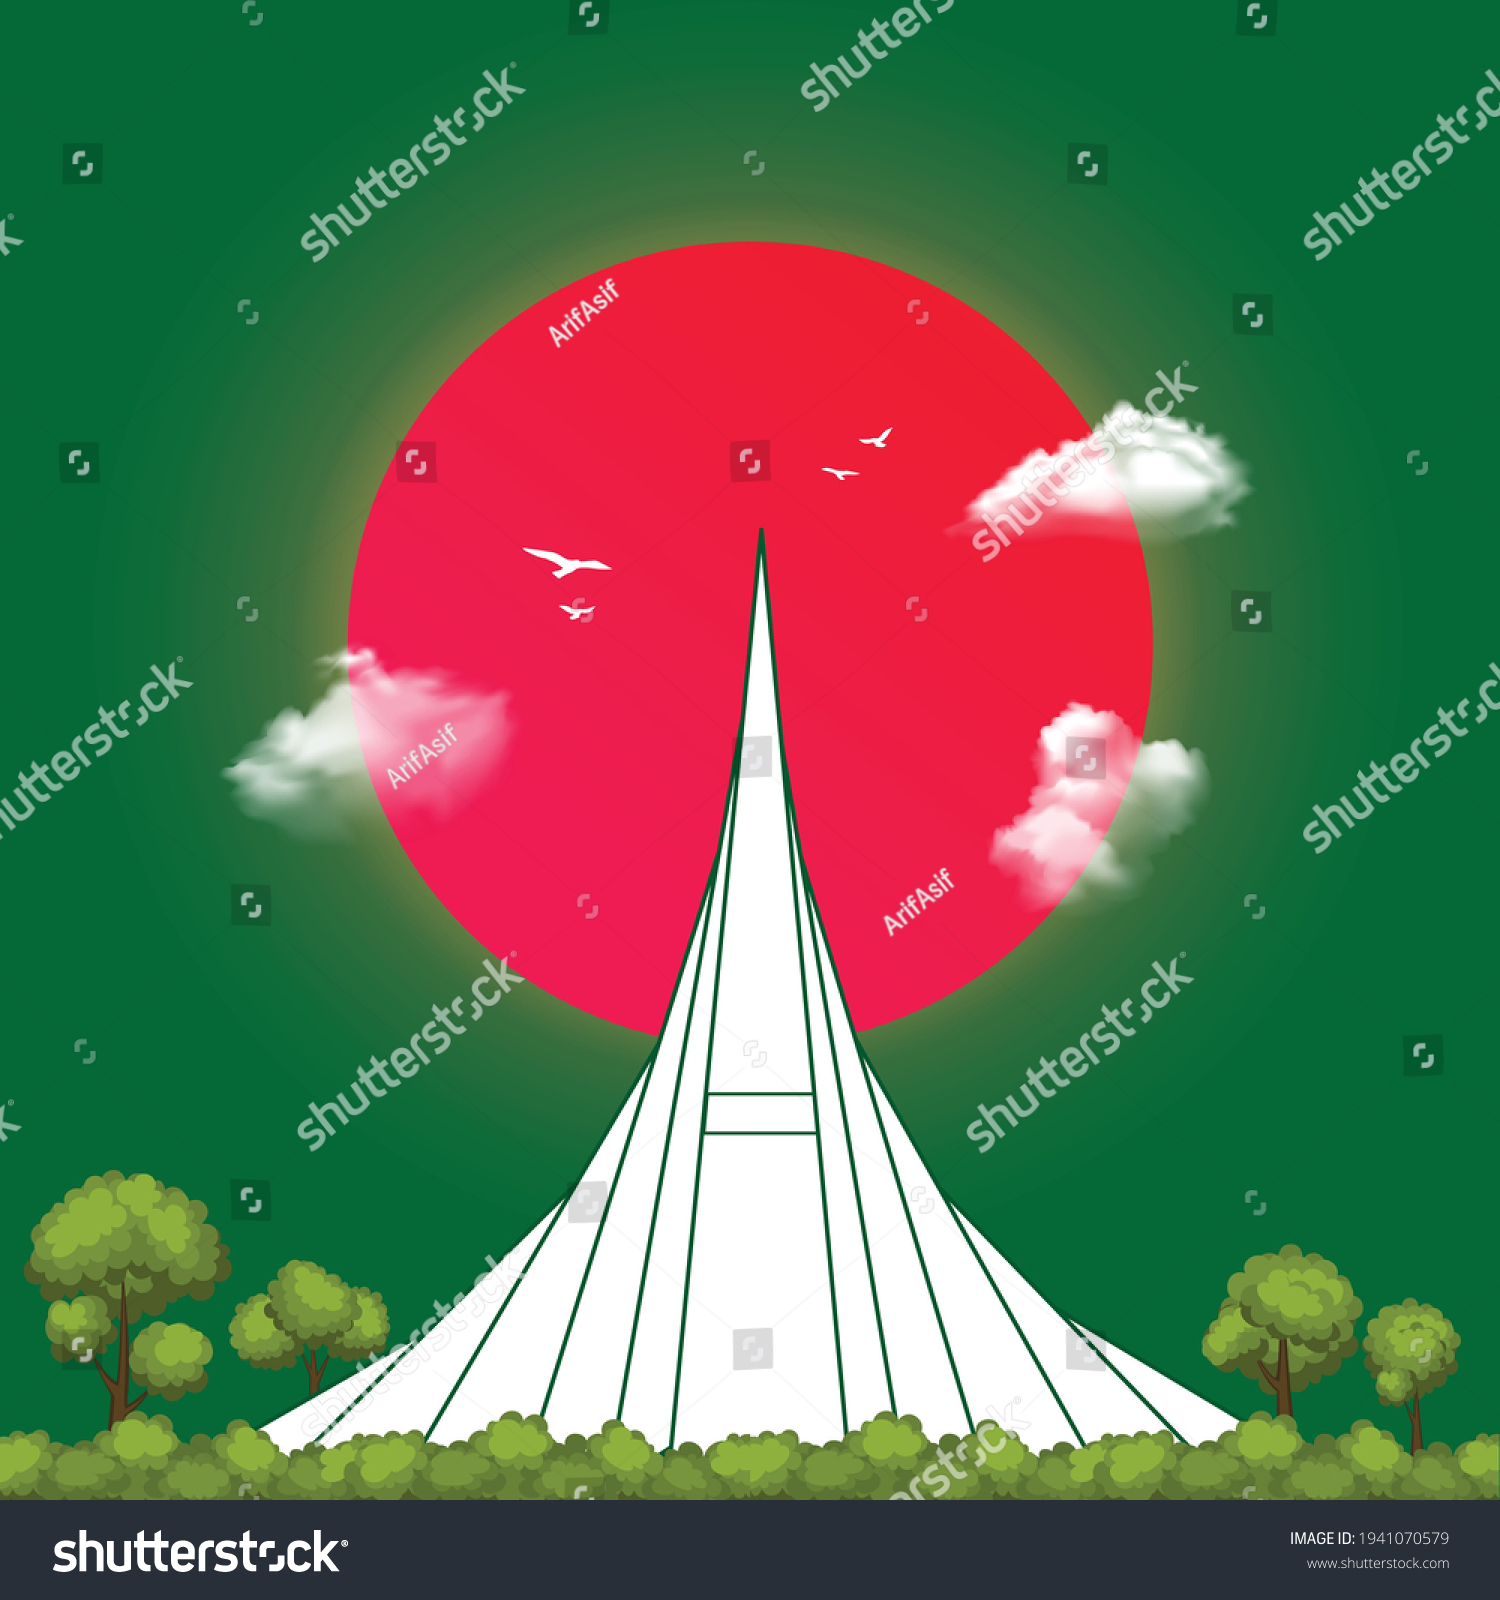 Illustration of Bangladesh independence day with the national monument, long wavy green and red flag, and the red sun. Bangladesh national day vector art. #1941070579